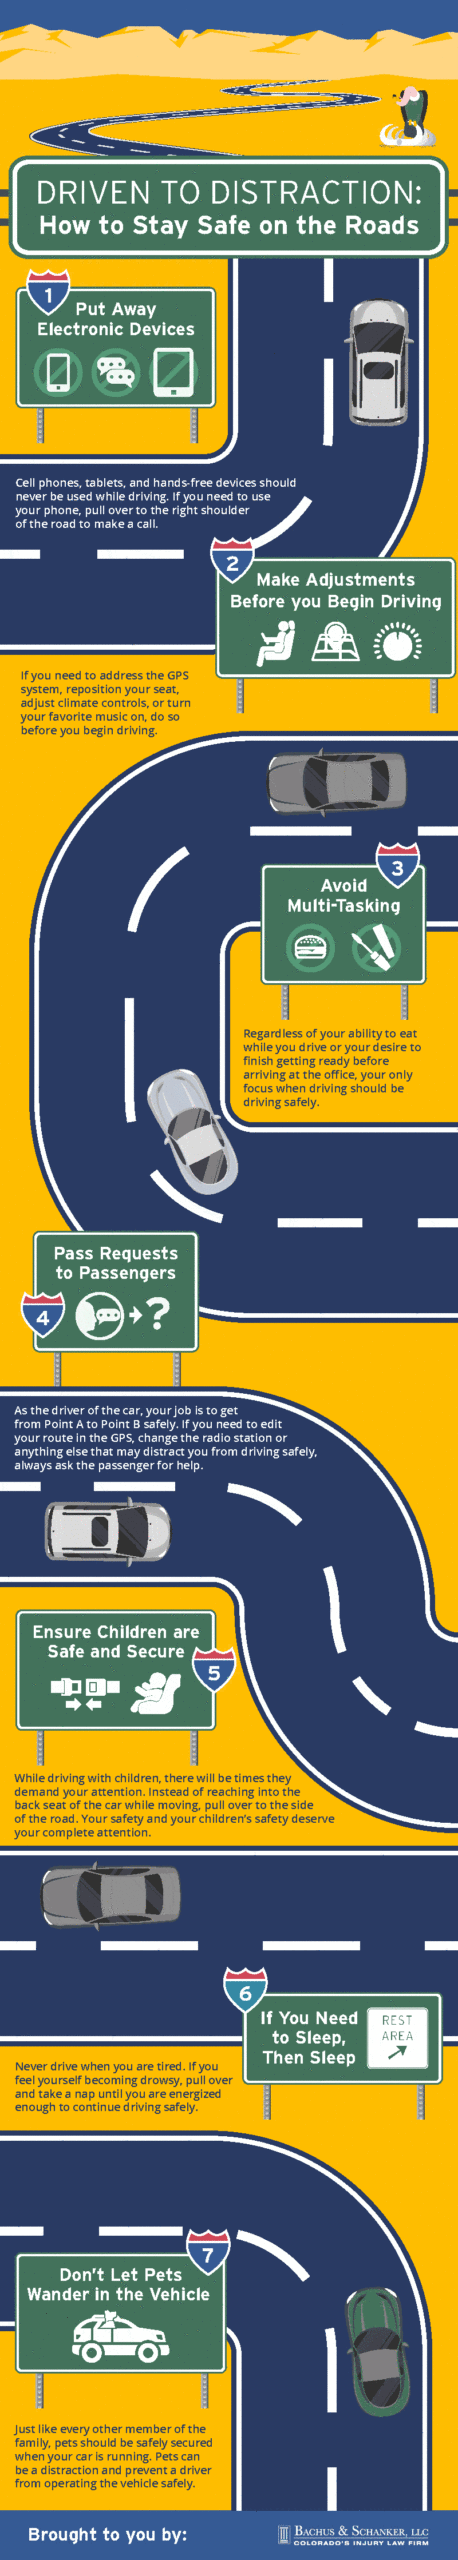 How to stay safe on the road infographic